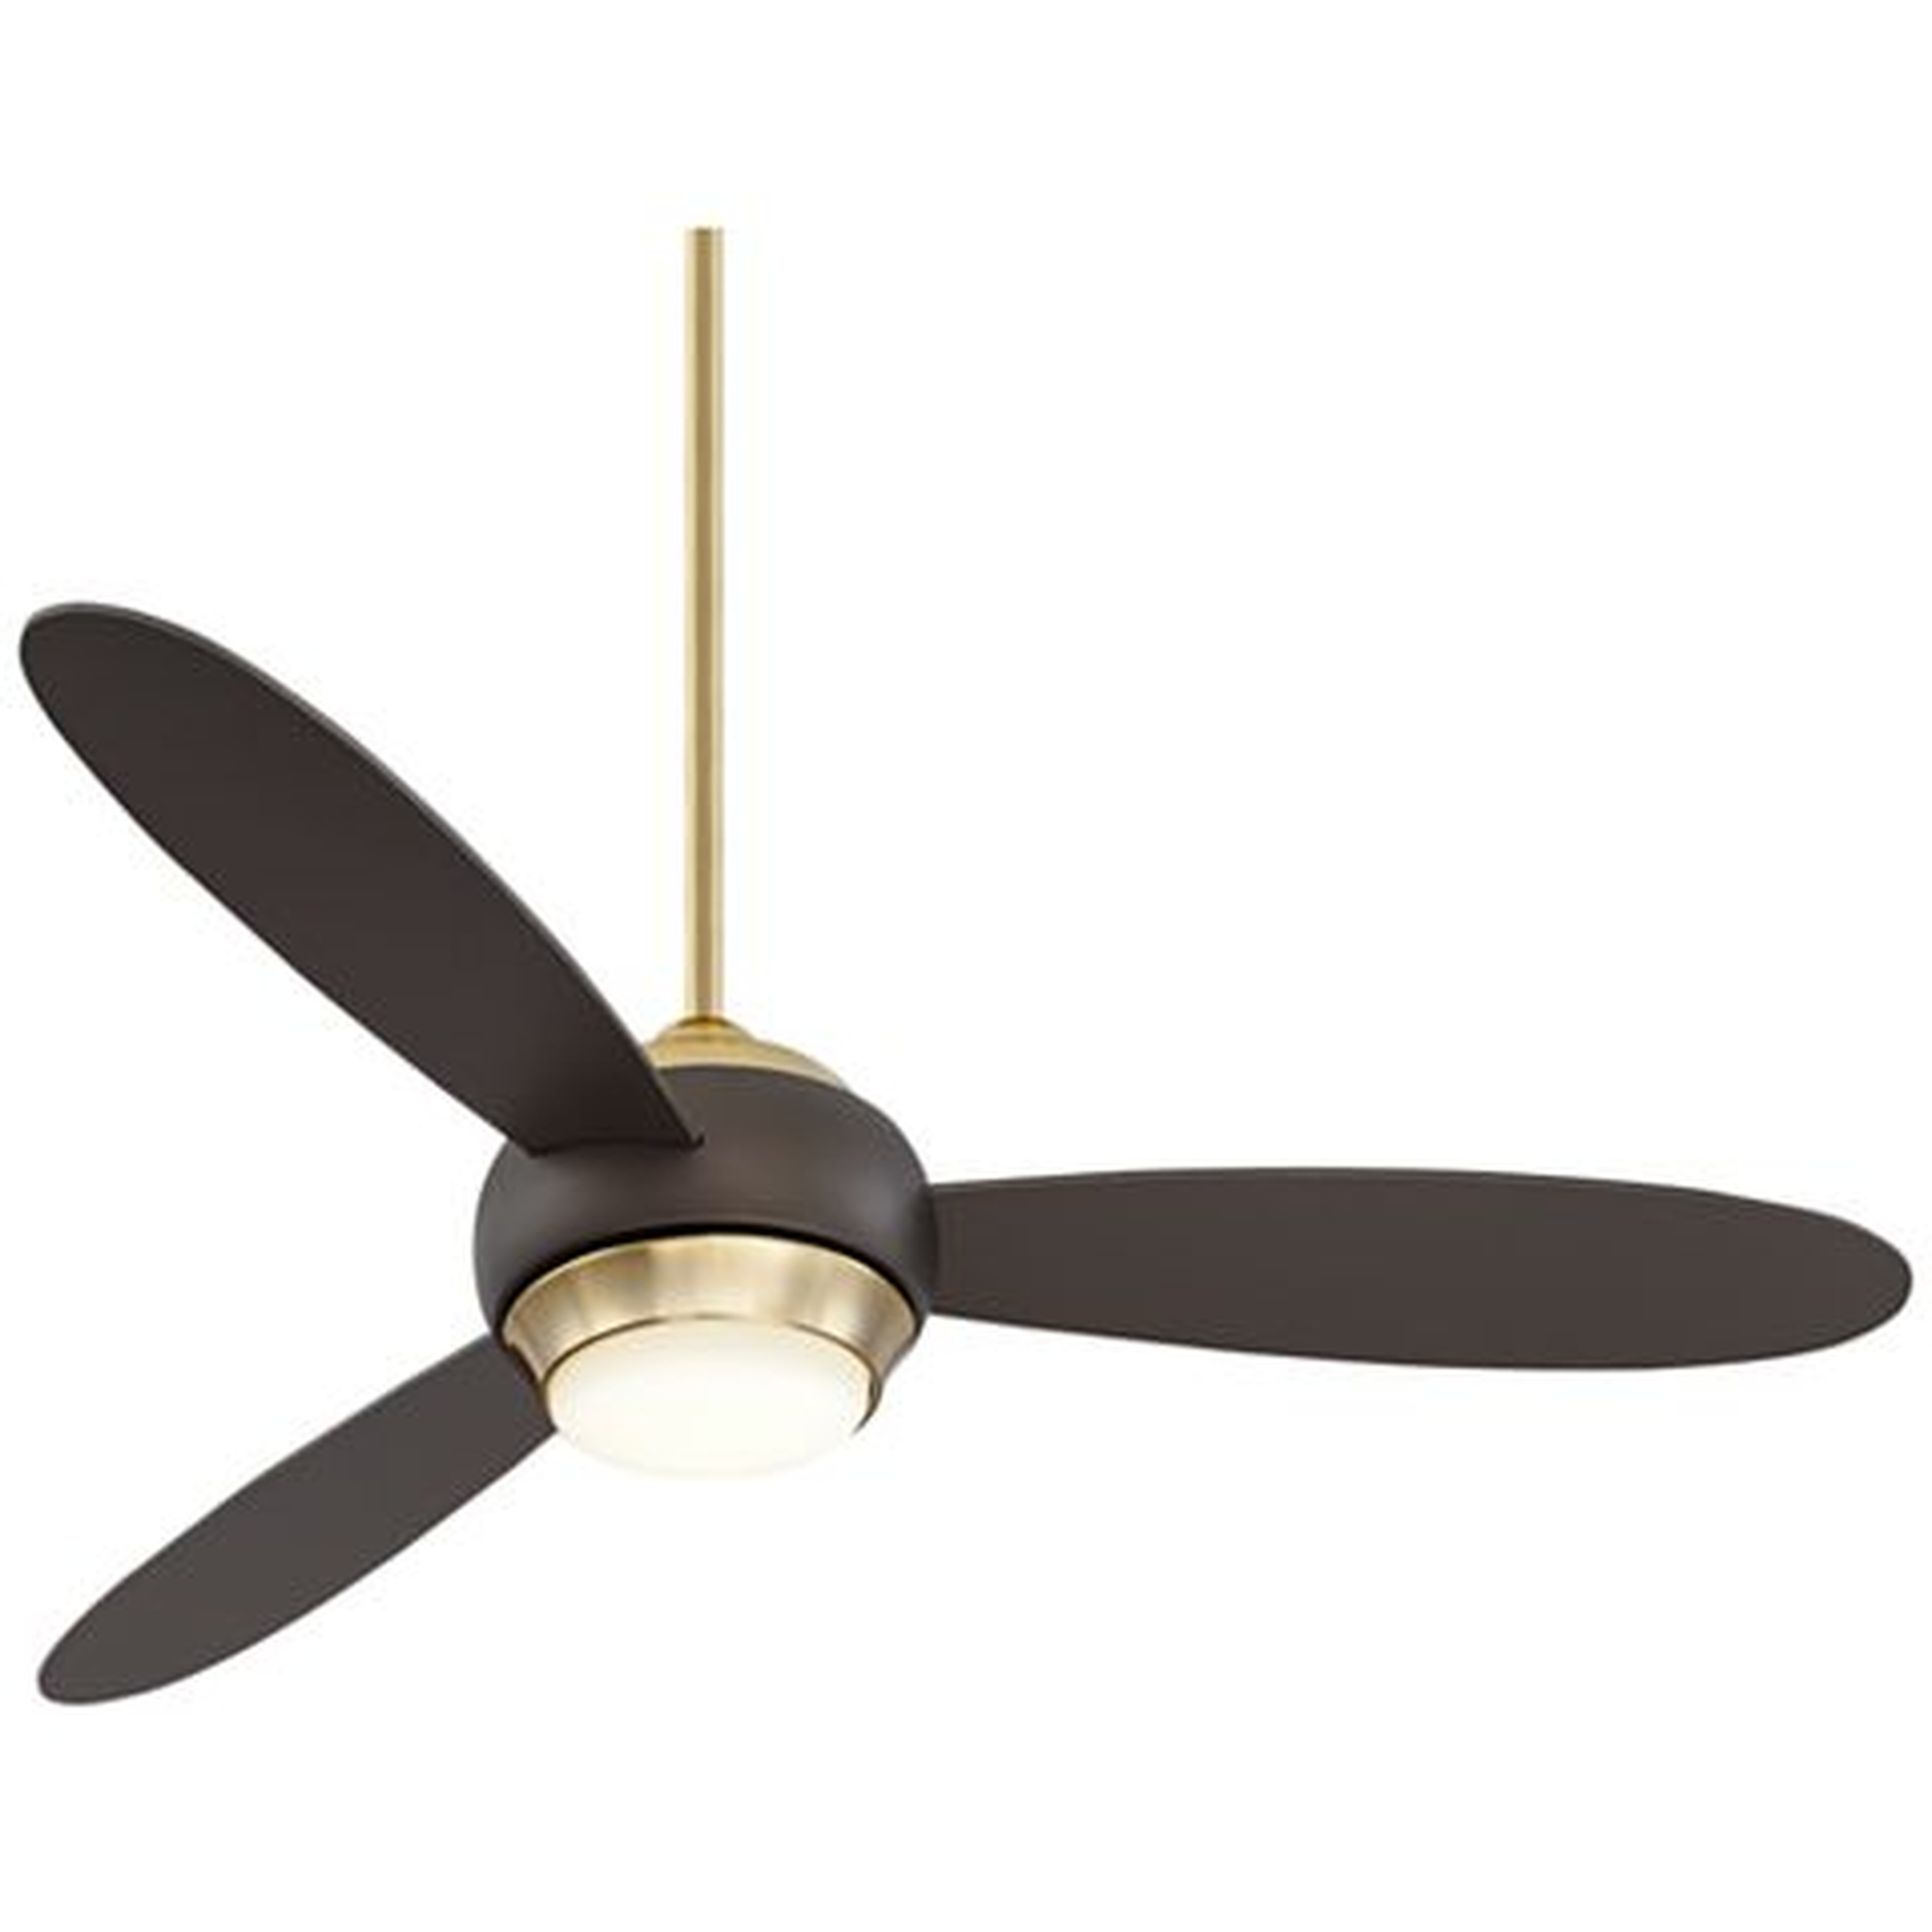 54" Casa Vieja Lynx Soft Brass and Bronze LED Ceiling Fan - Lamps Plus